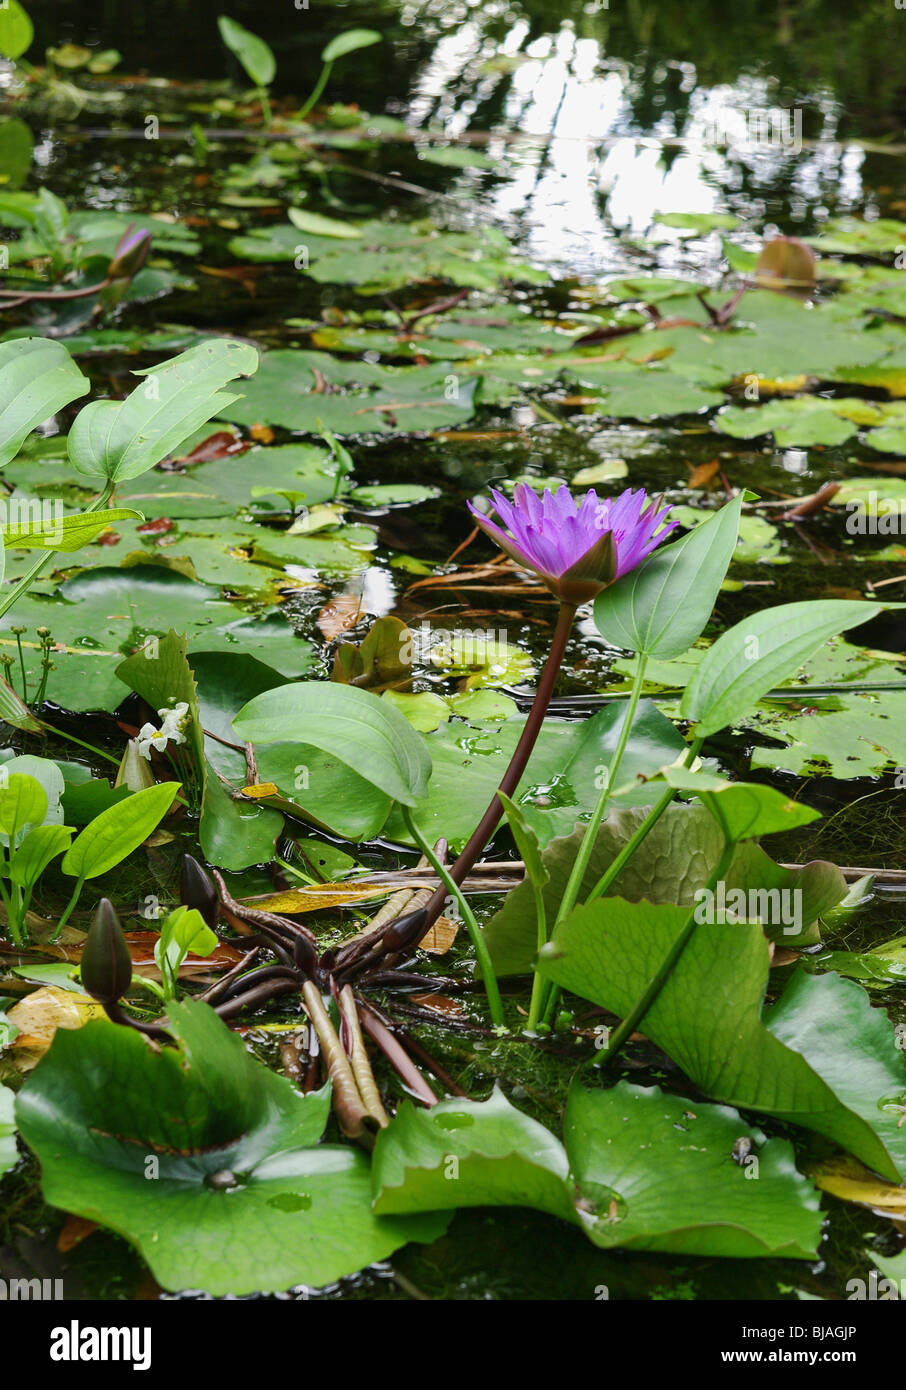 great image of a water lilly in a garden pond Stock Photo